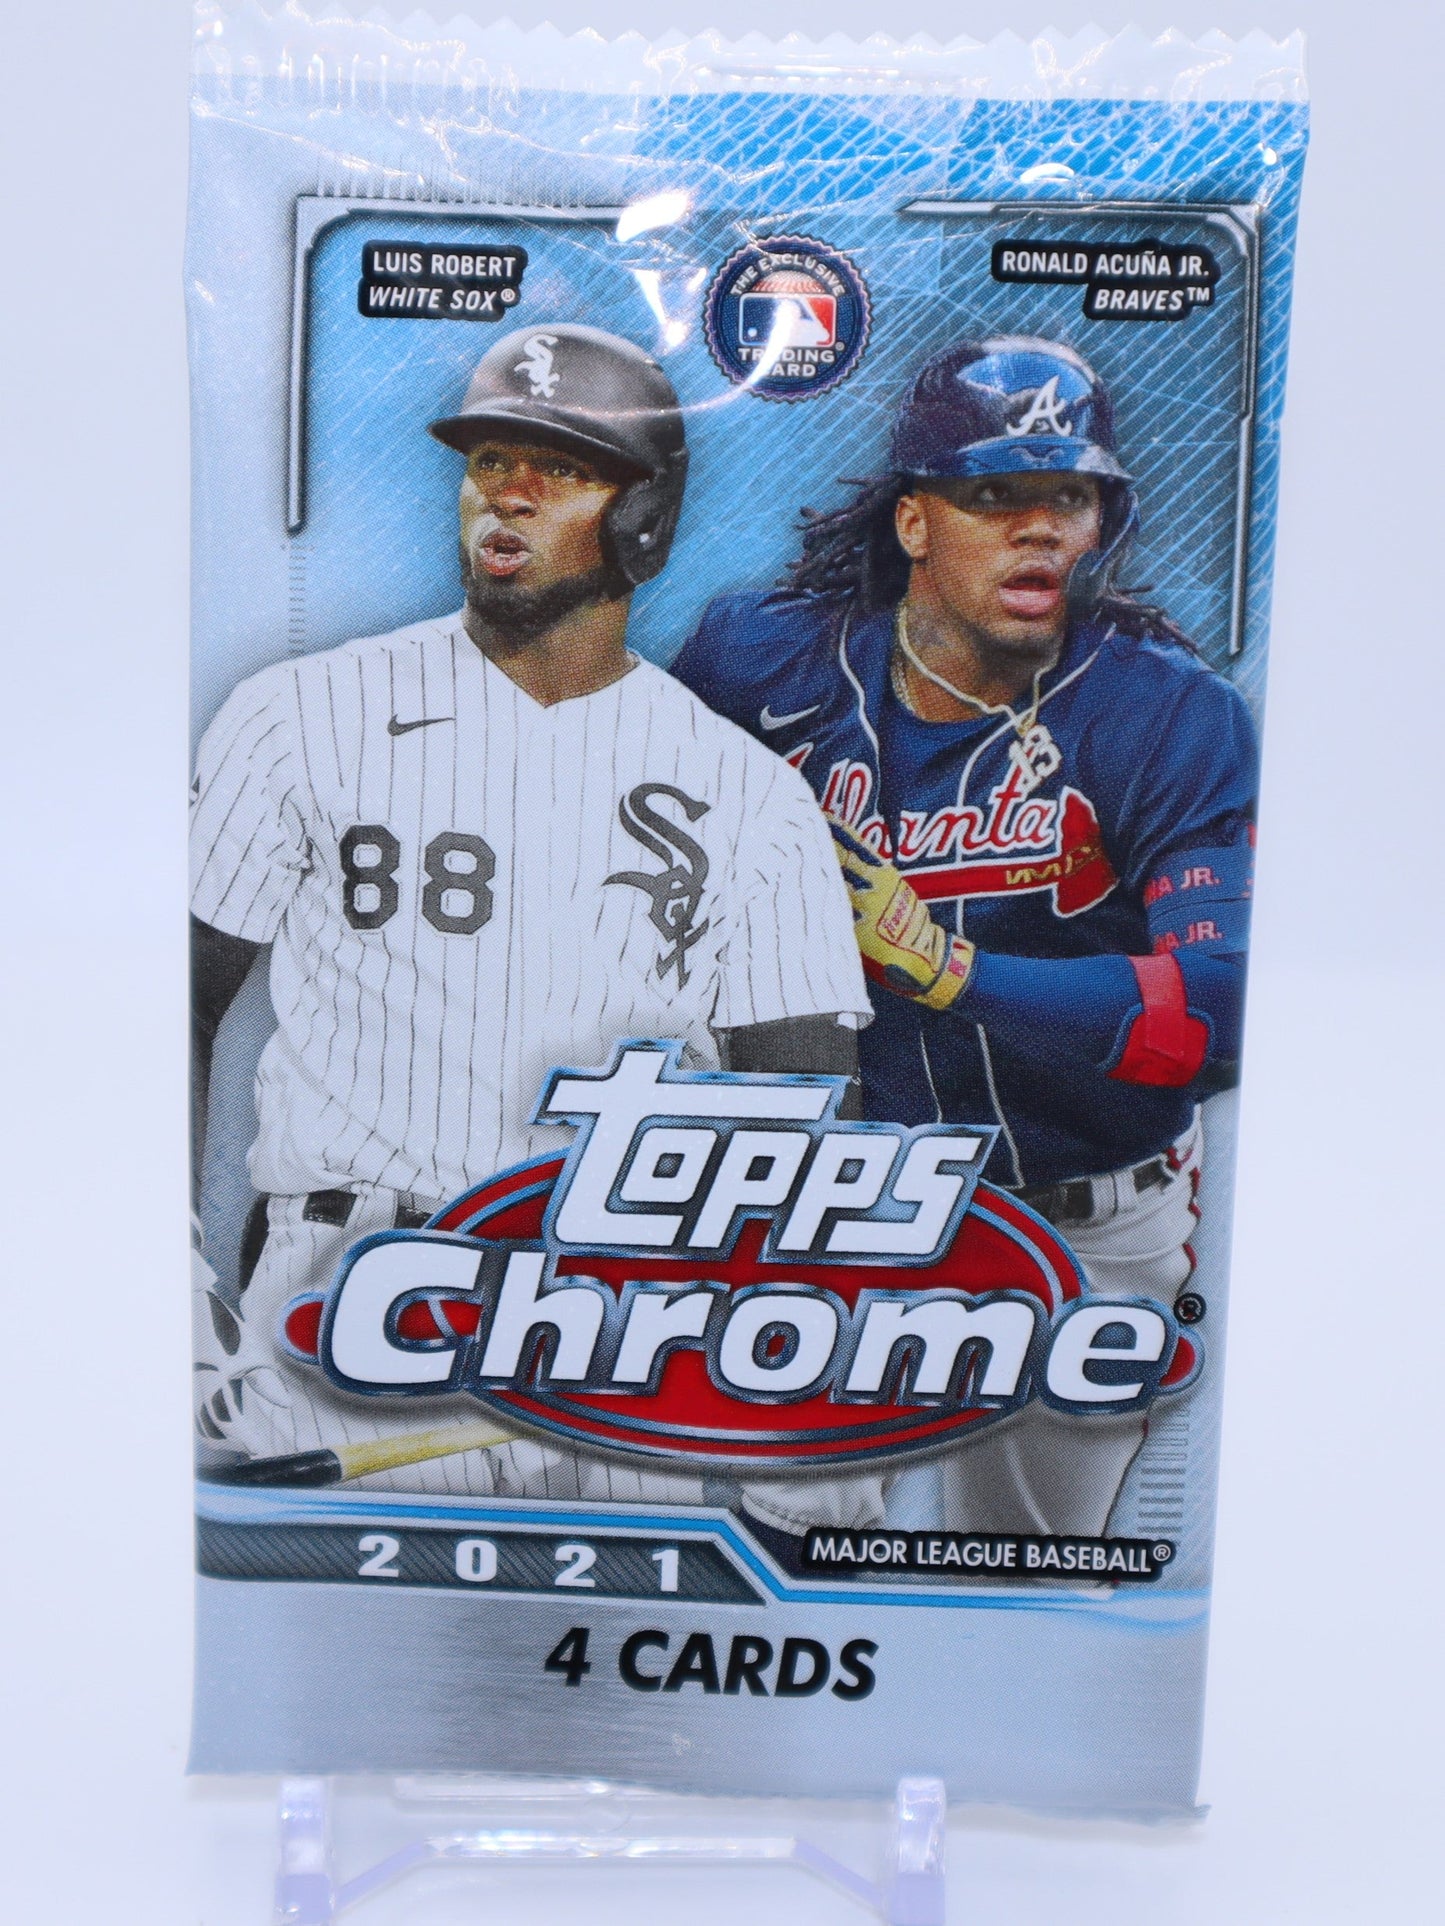 2021 Topps Chrome Baseball Cards Blaster Box Wax Pack - Collectibles